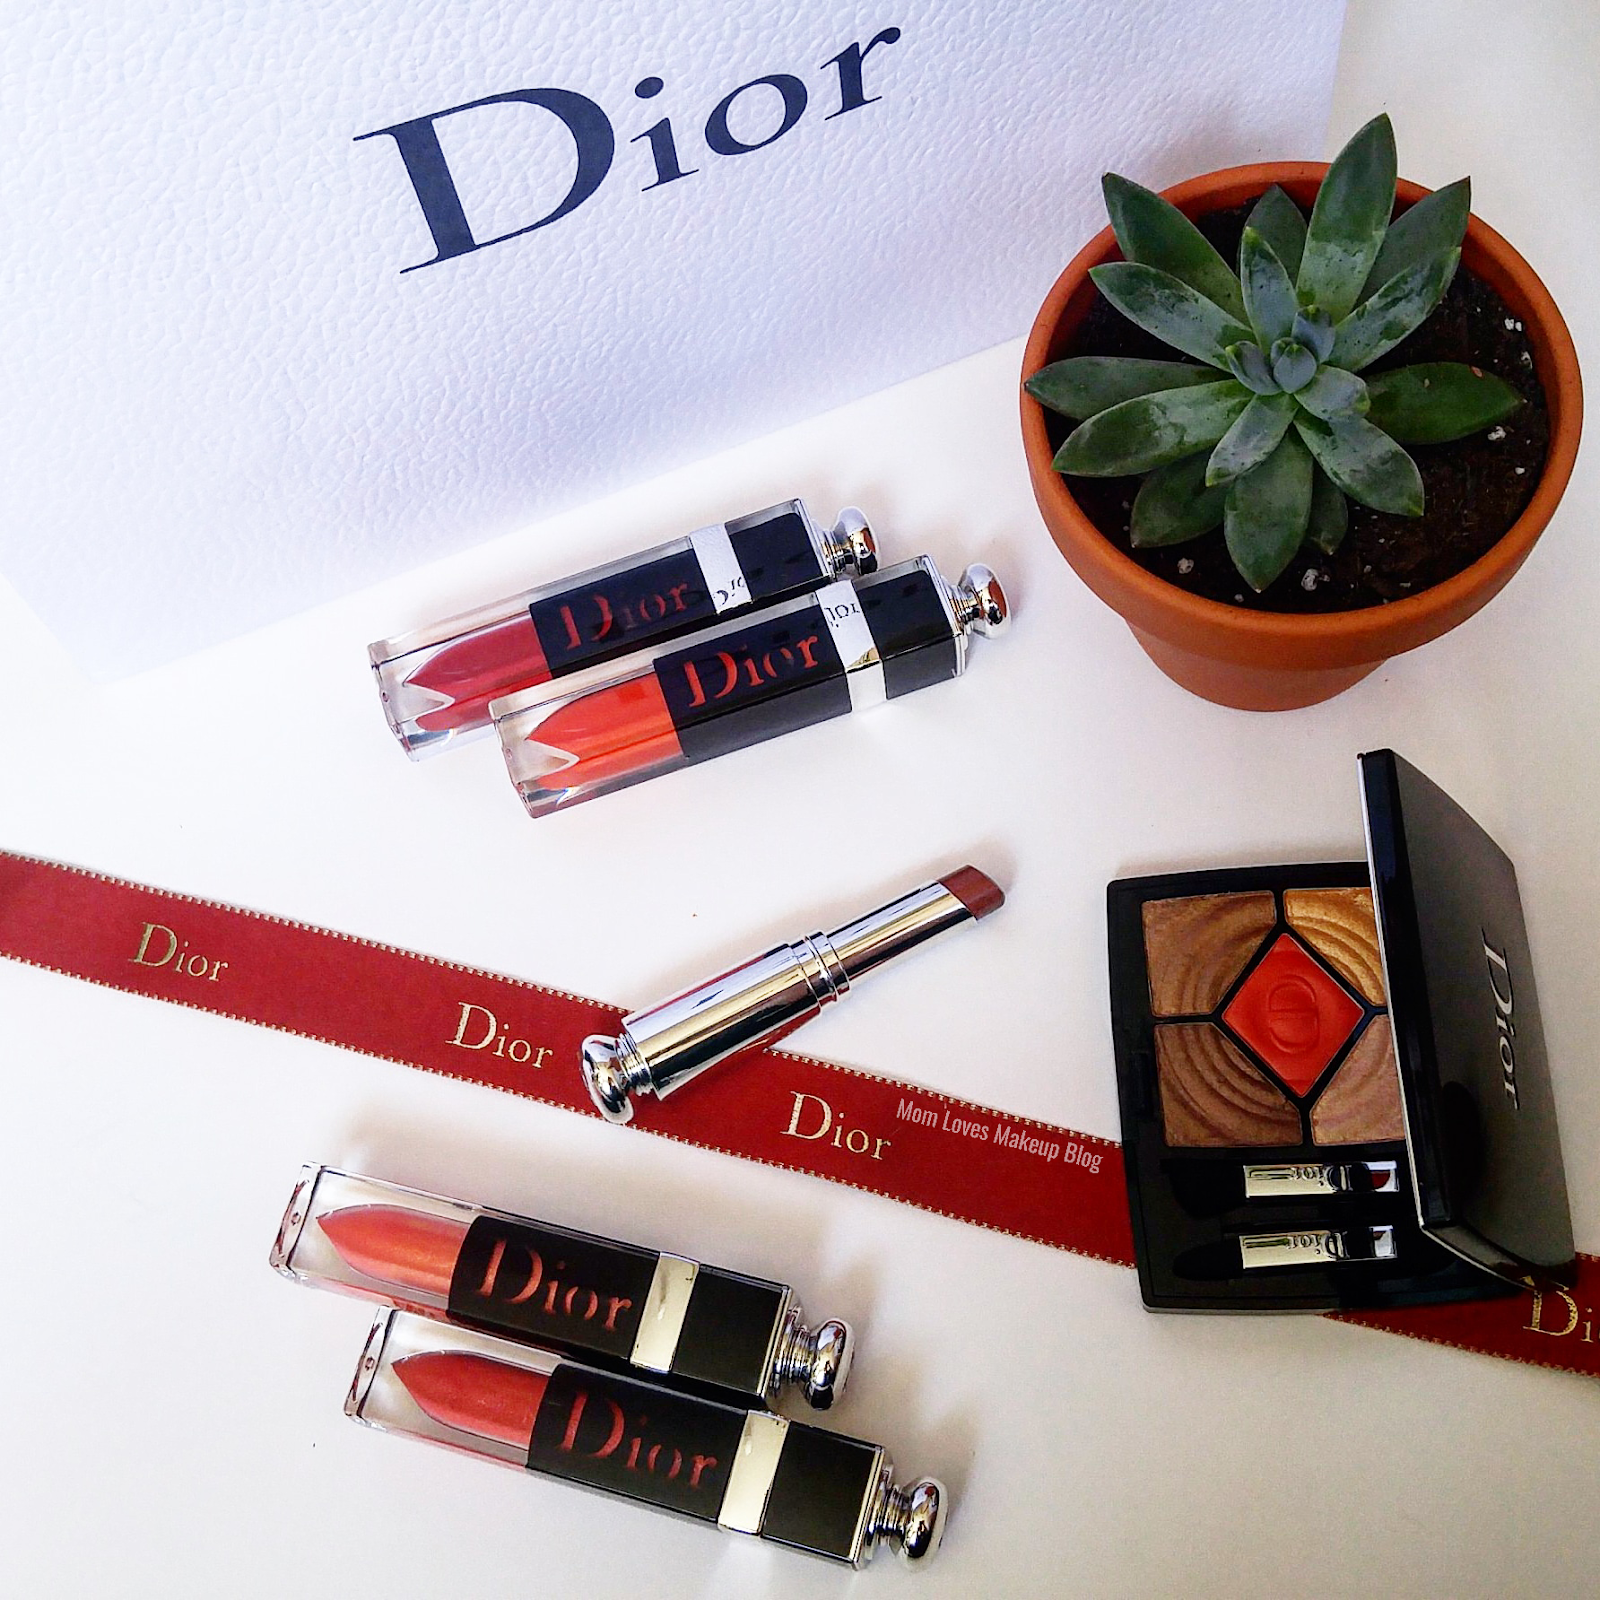 Dior Addict Lacquer Plump Review and Swatches